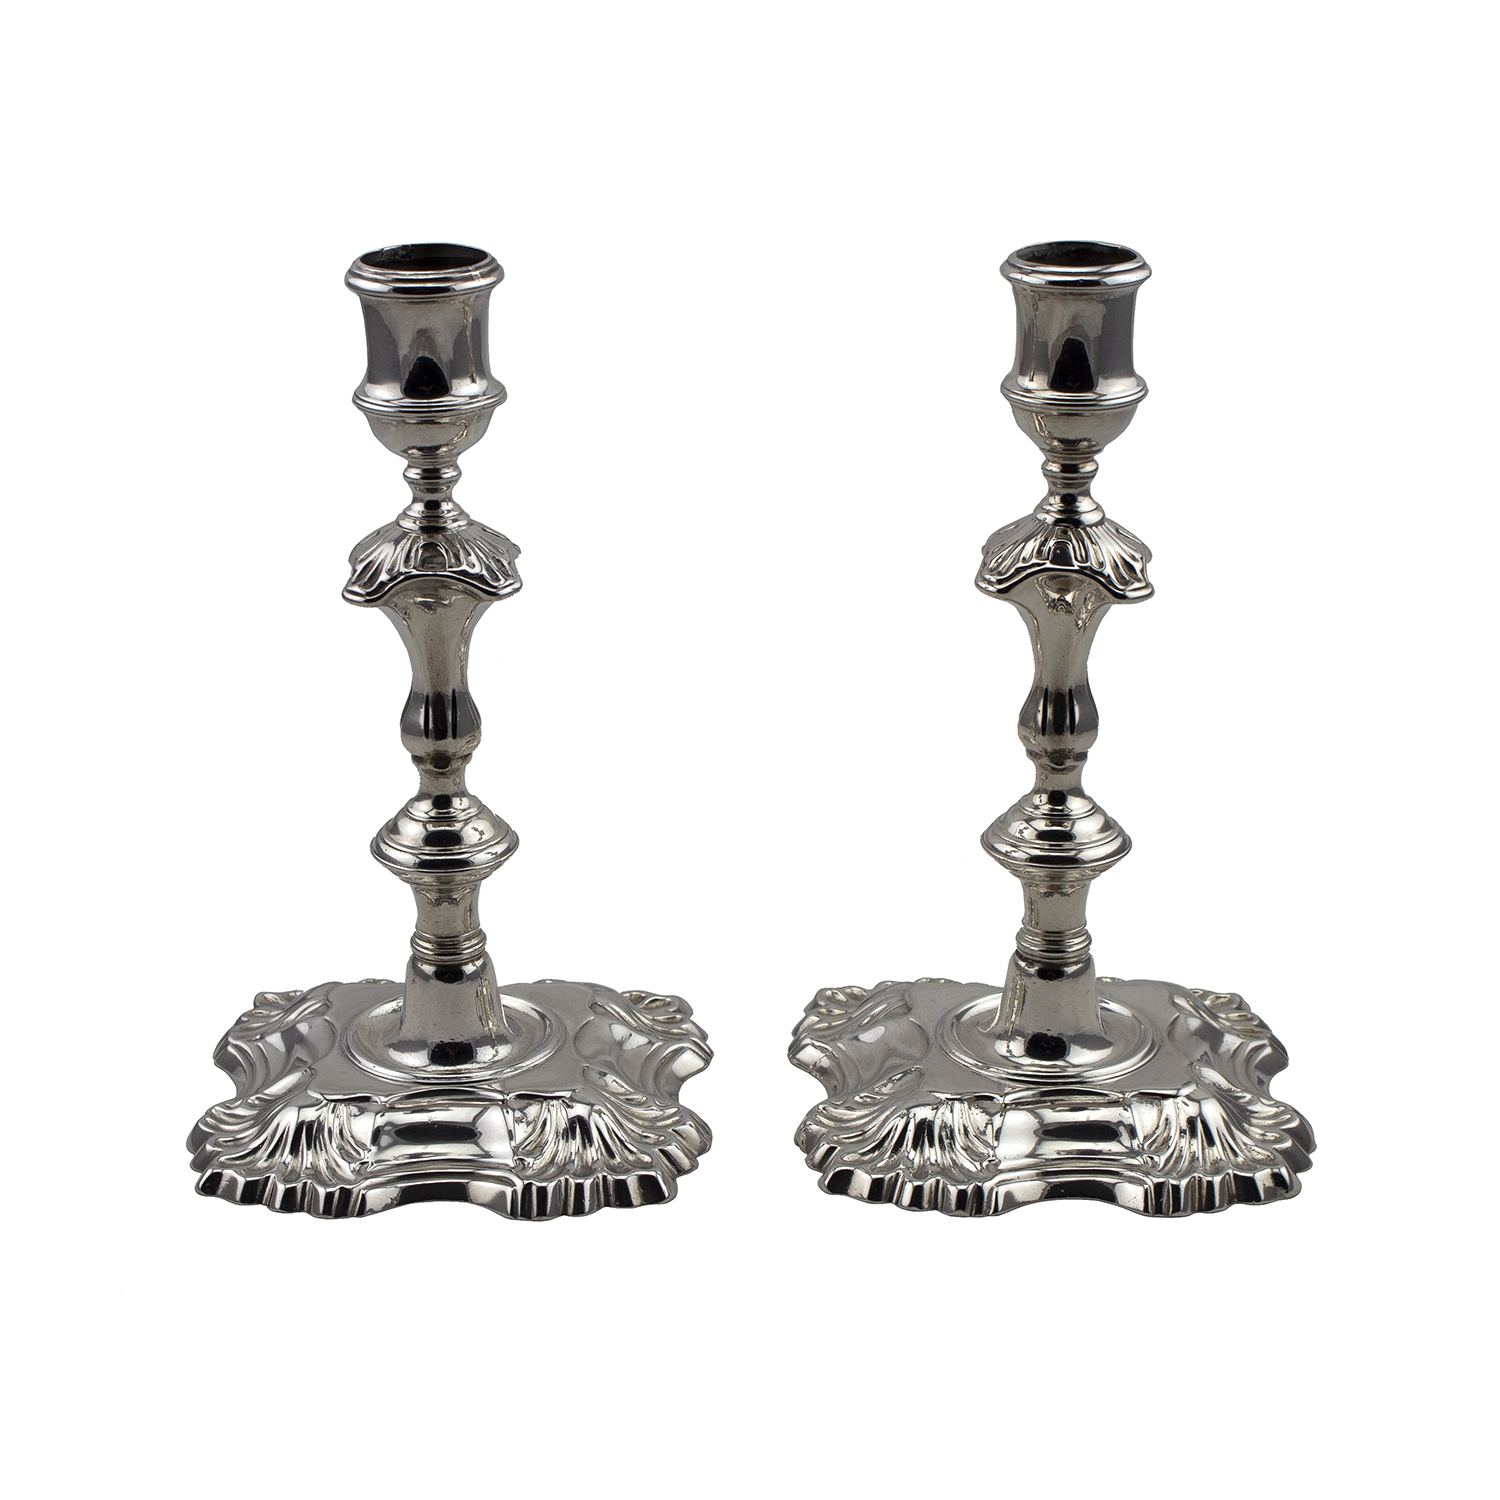 George II Candlesticks with Cast Shell Form, London 1748